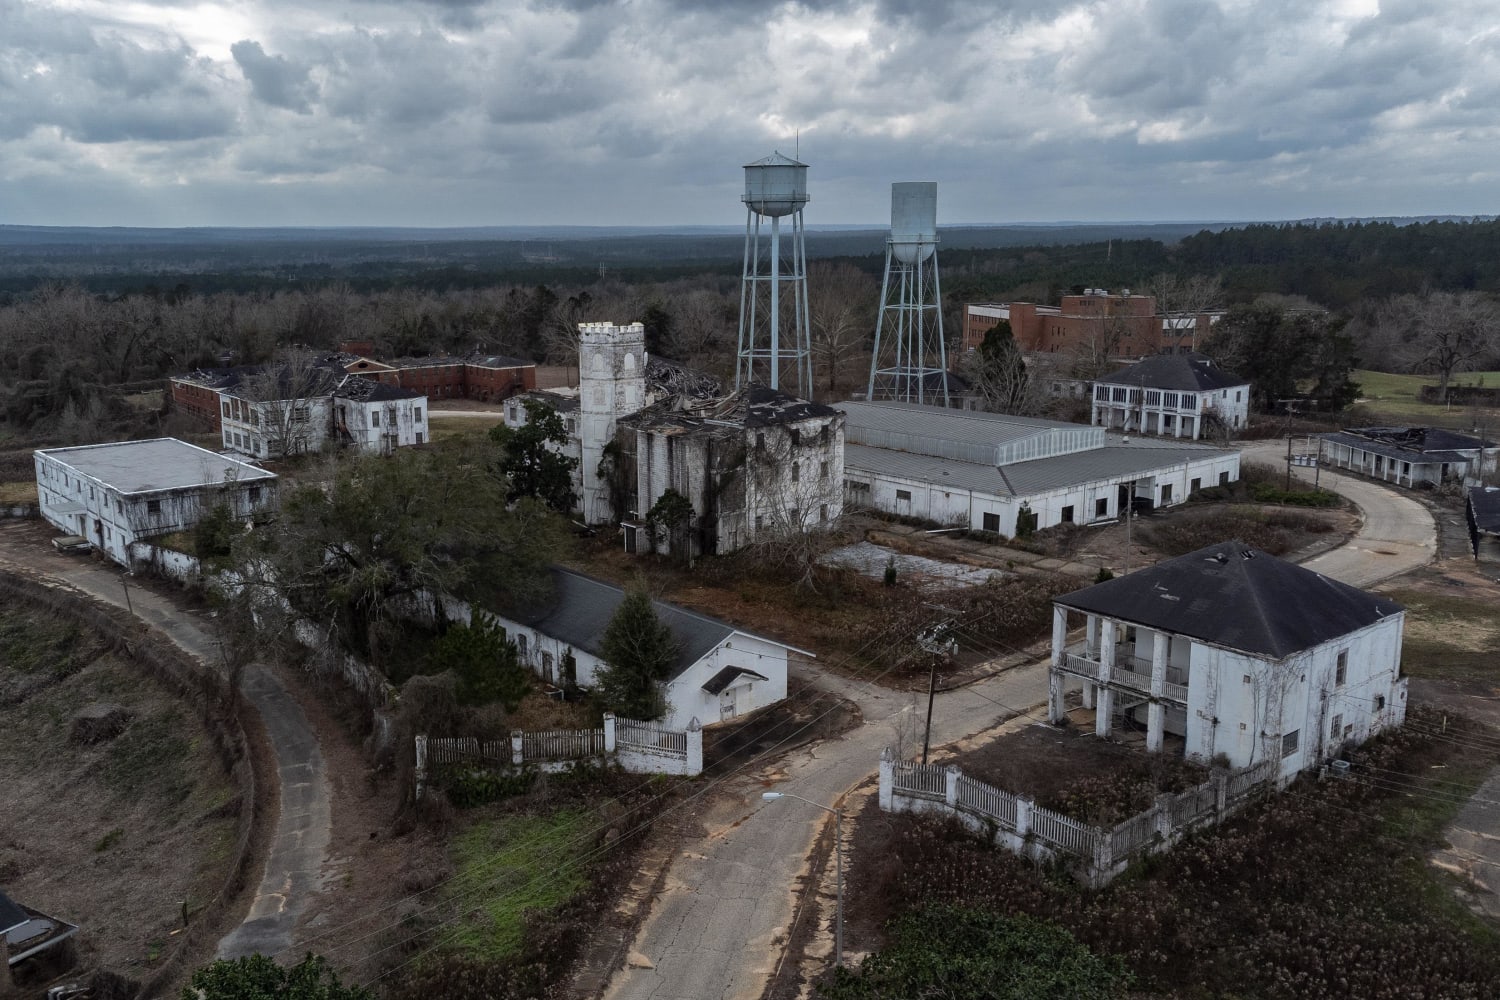 US Army munitions depot later converted to an African-American psychiatric hospital complex. Now completely abandoned.